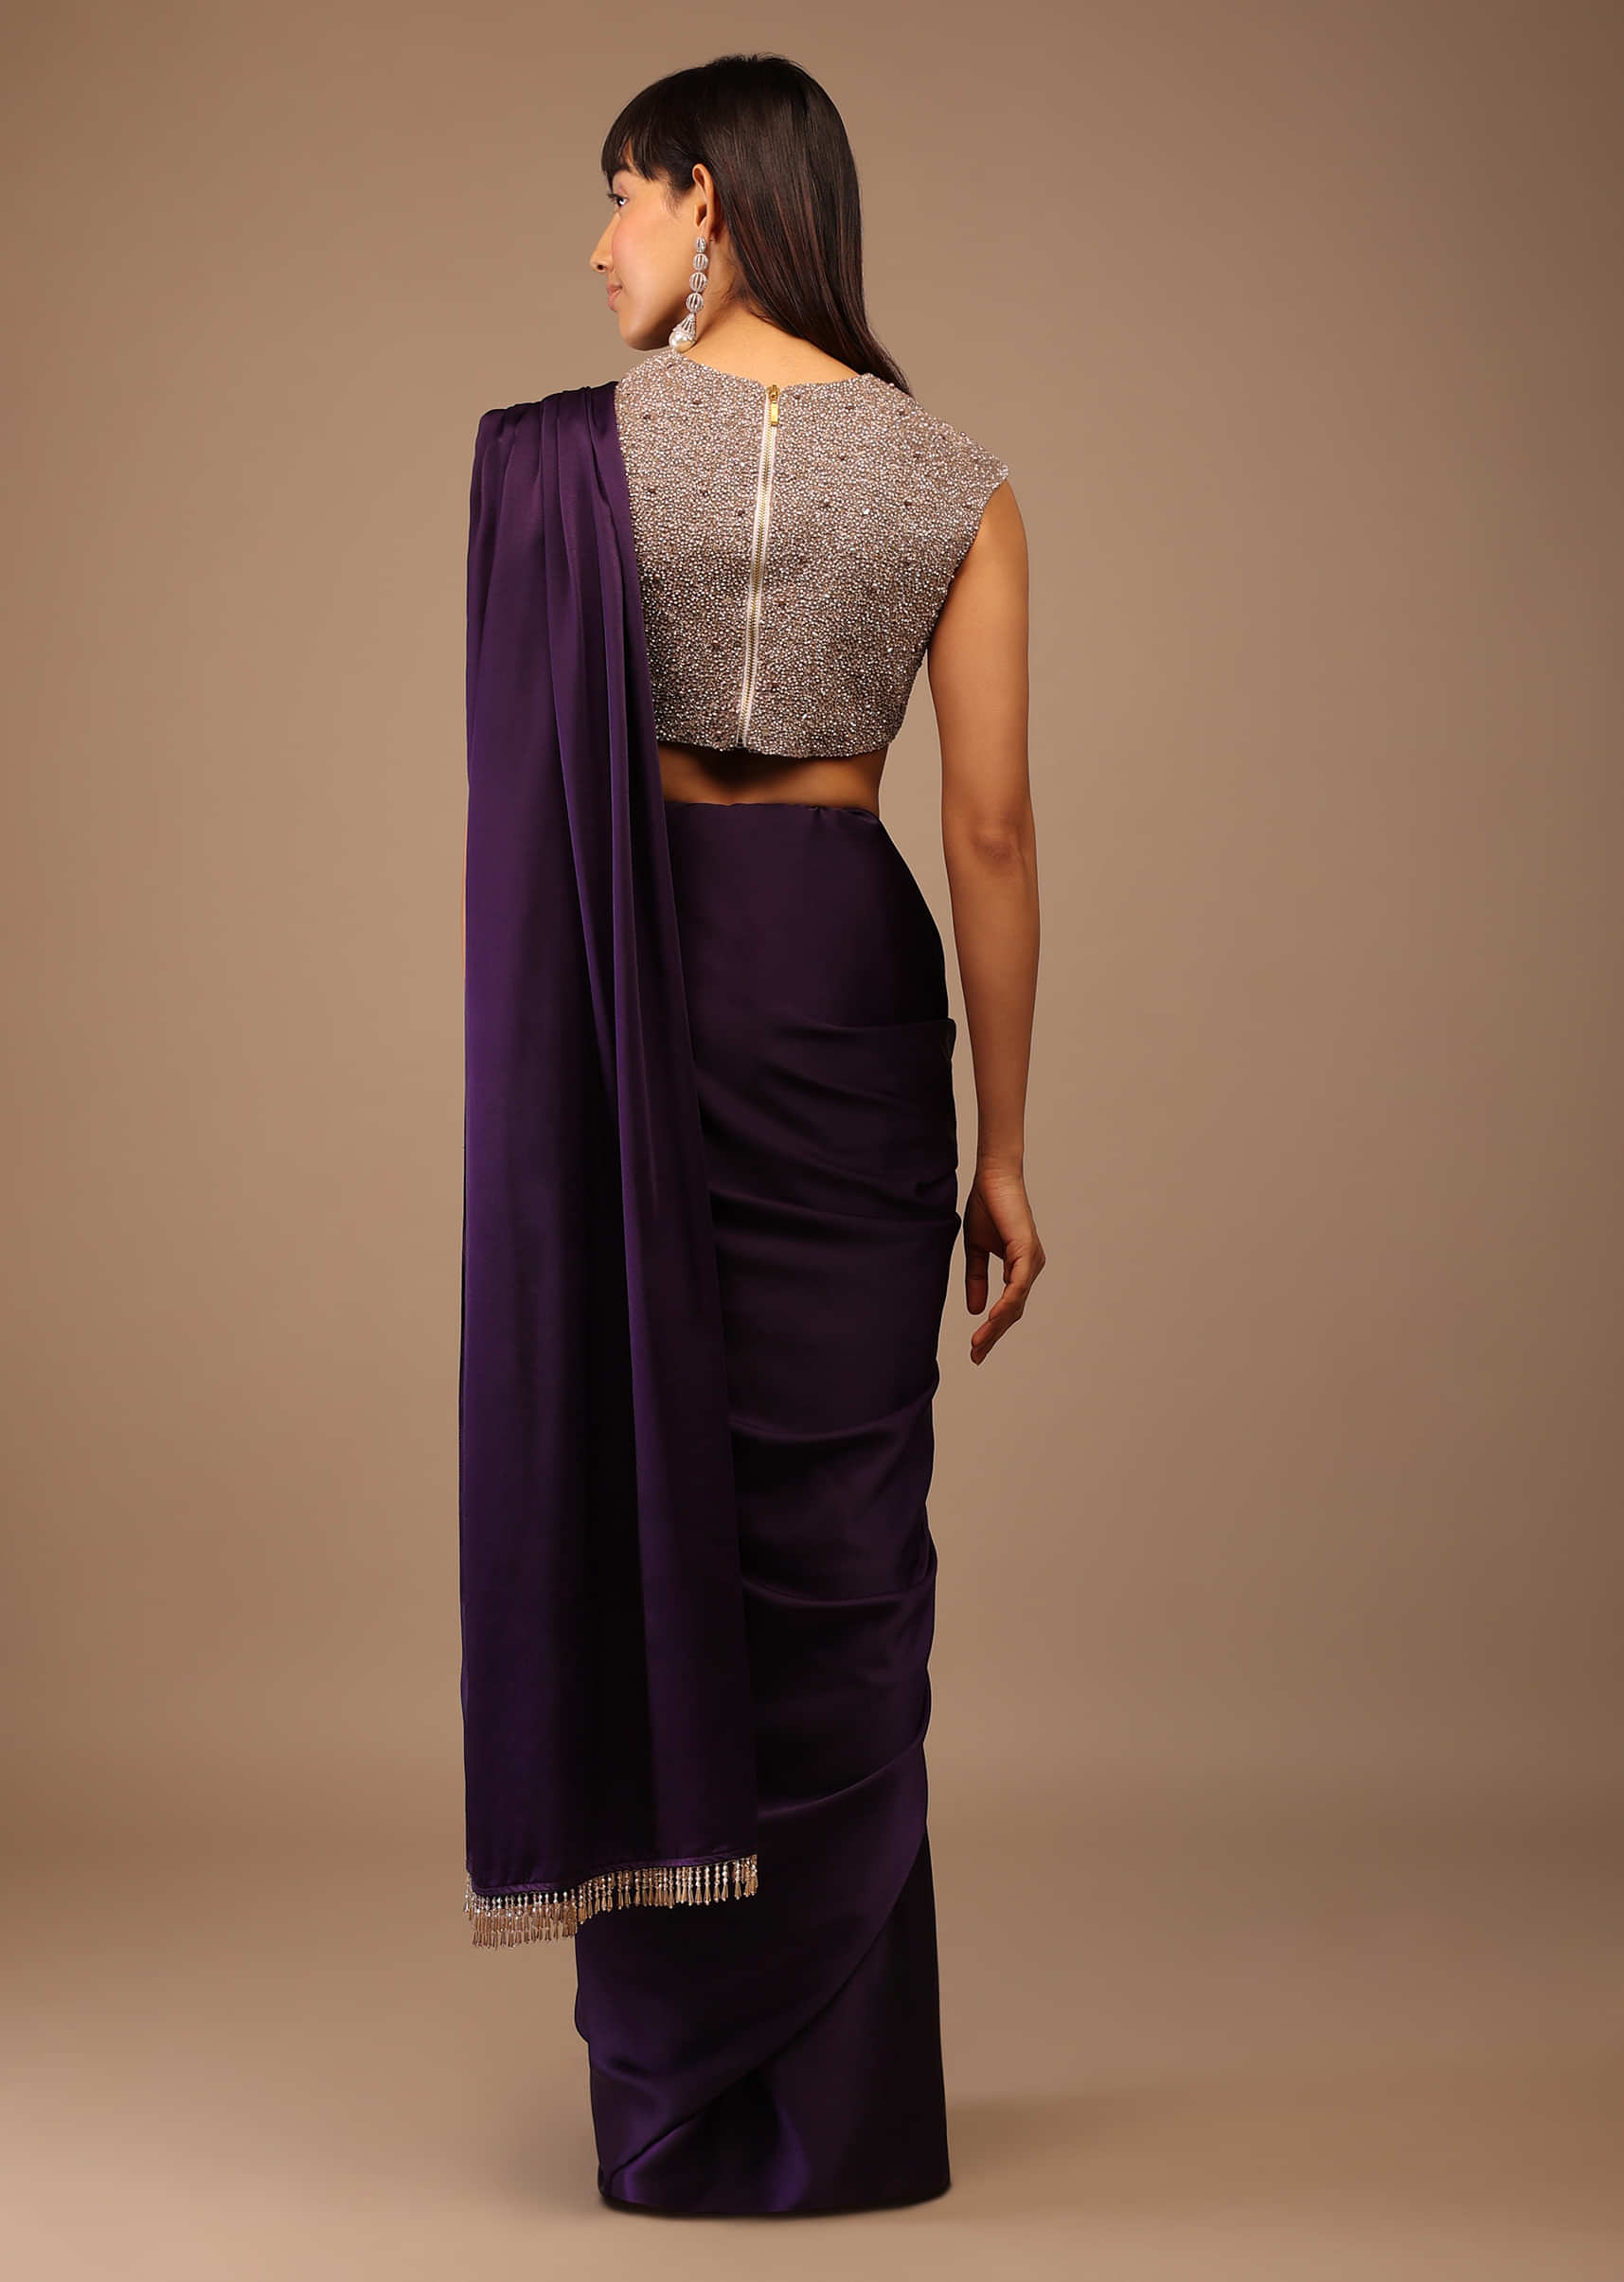 Purple Satin Saree With V Neck Hand Embroidered Crop Top